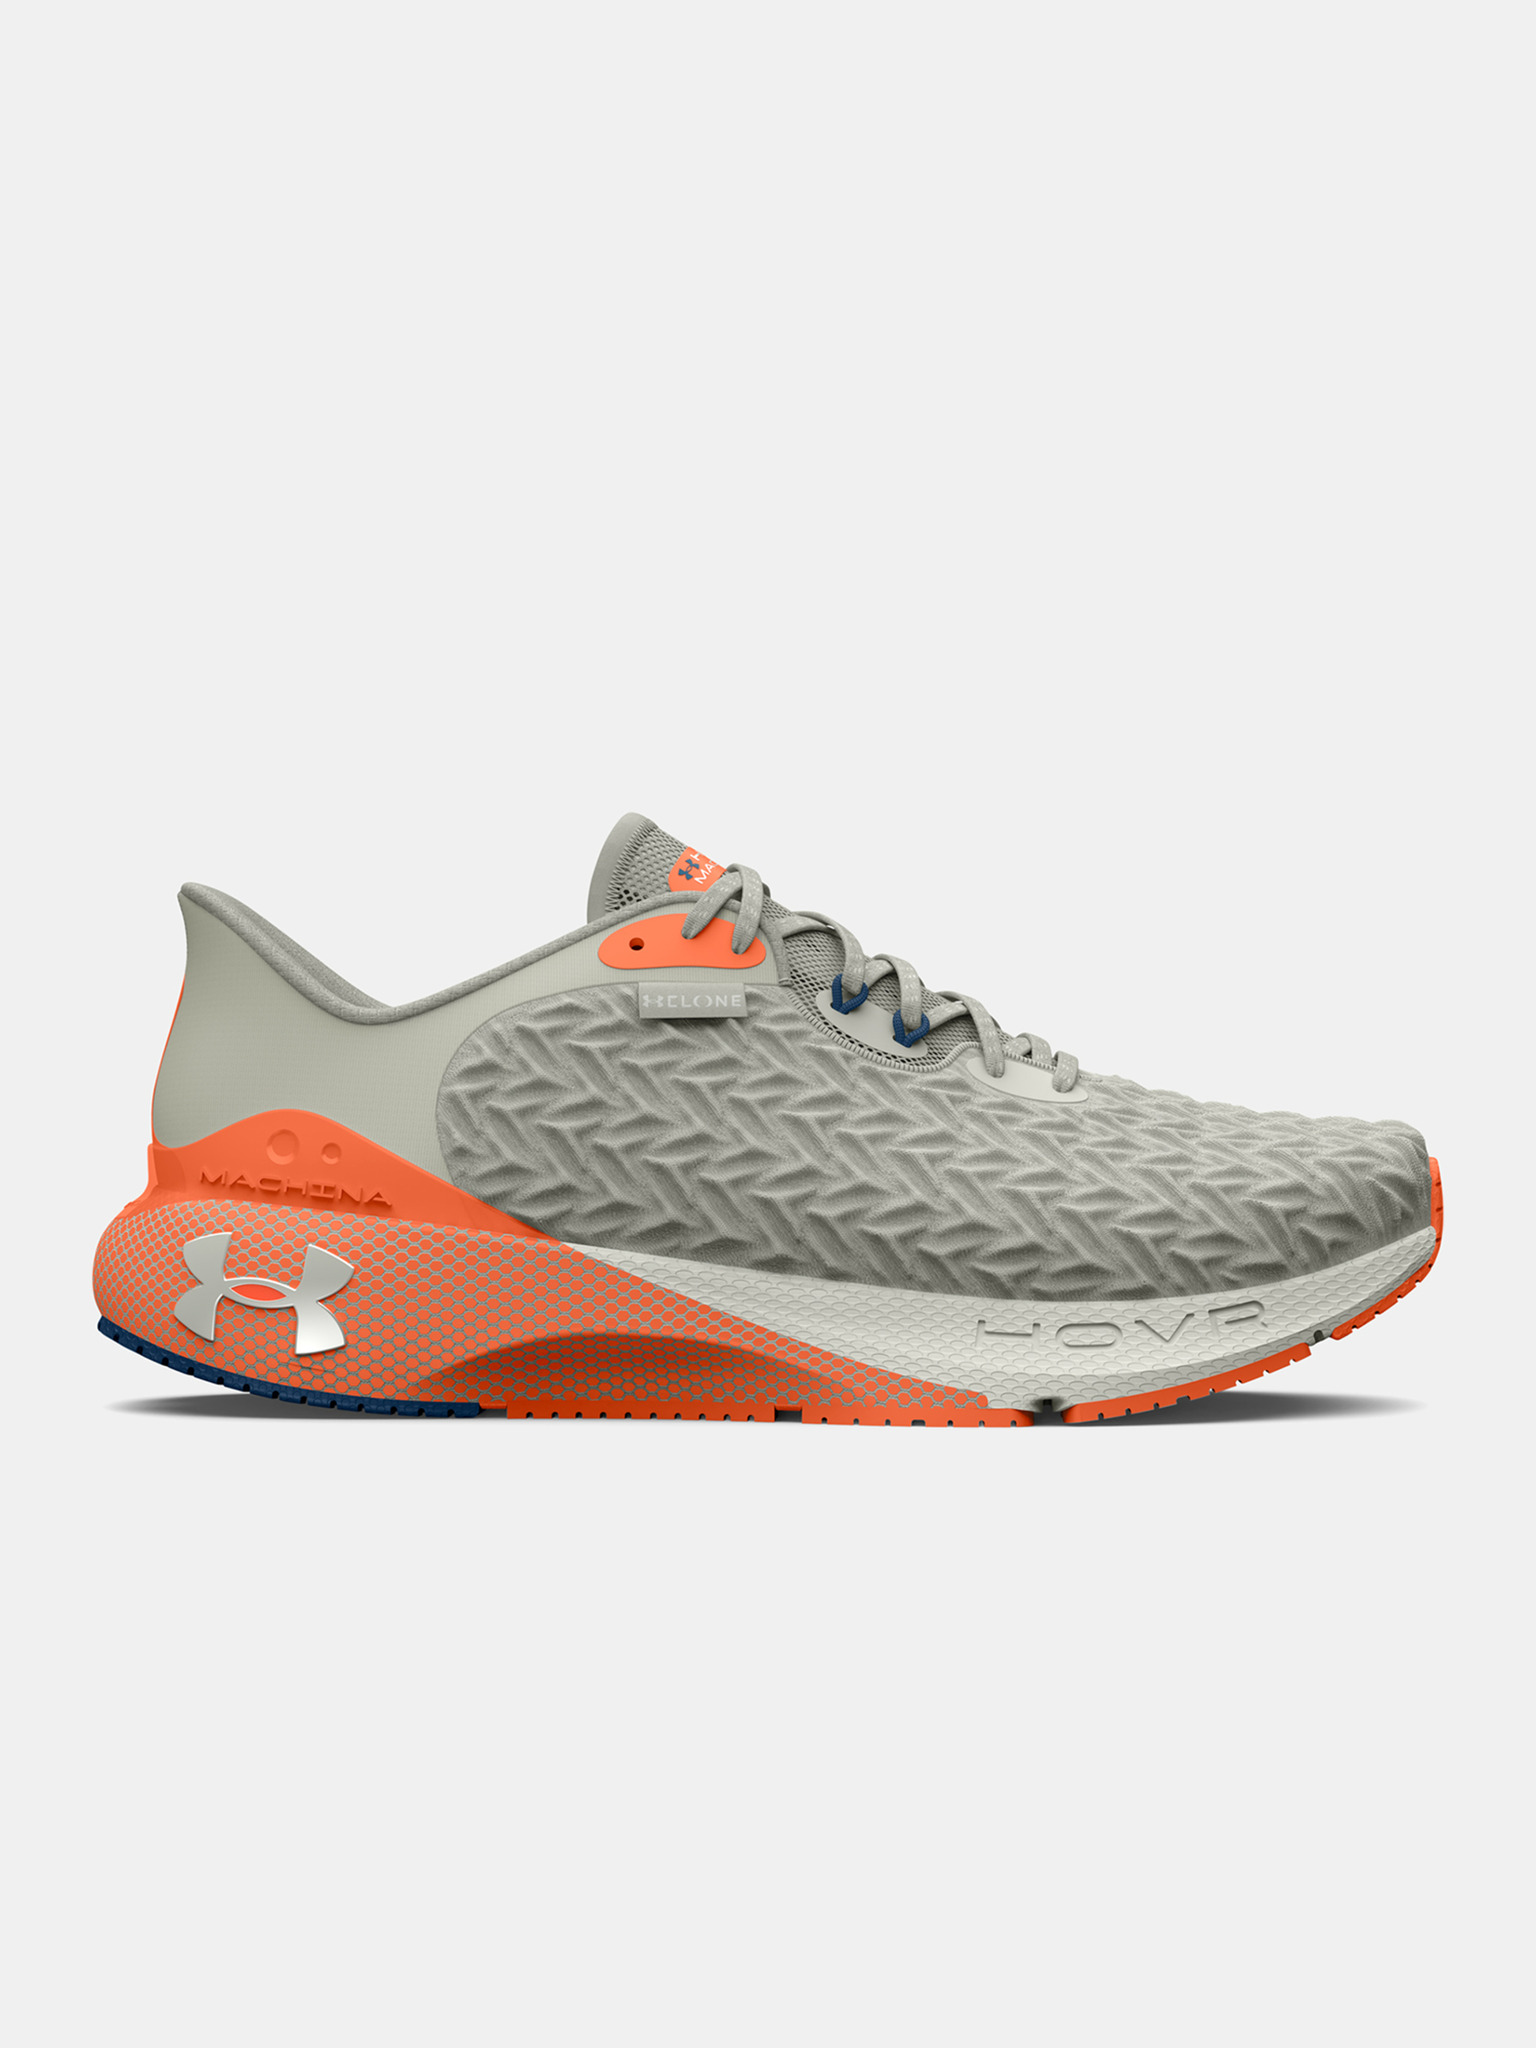 UA HOVR Machina 3 Clone. Under Armour Running Shoe Size Guide And